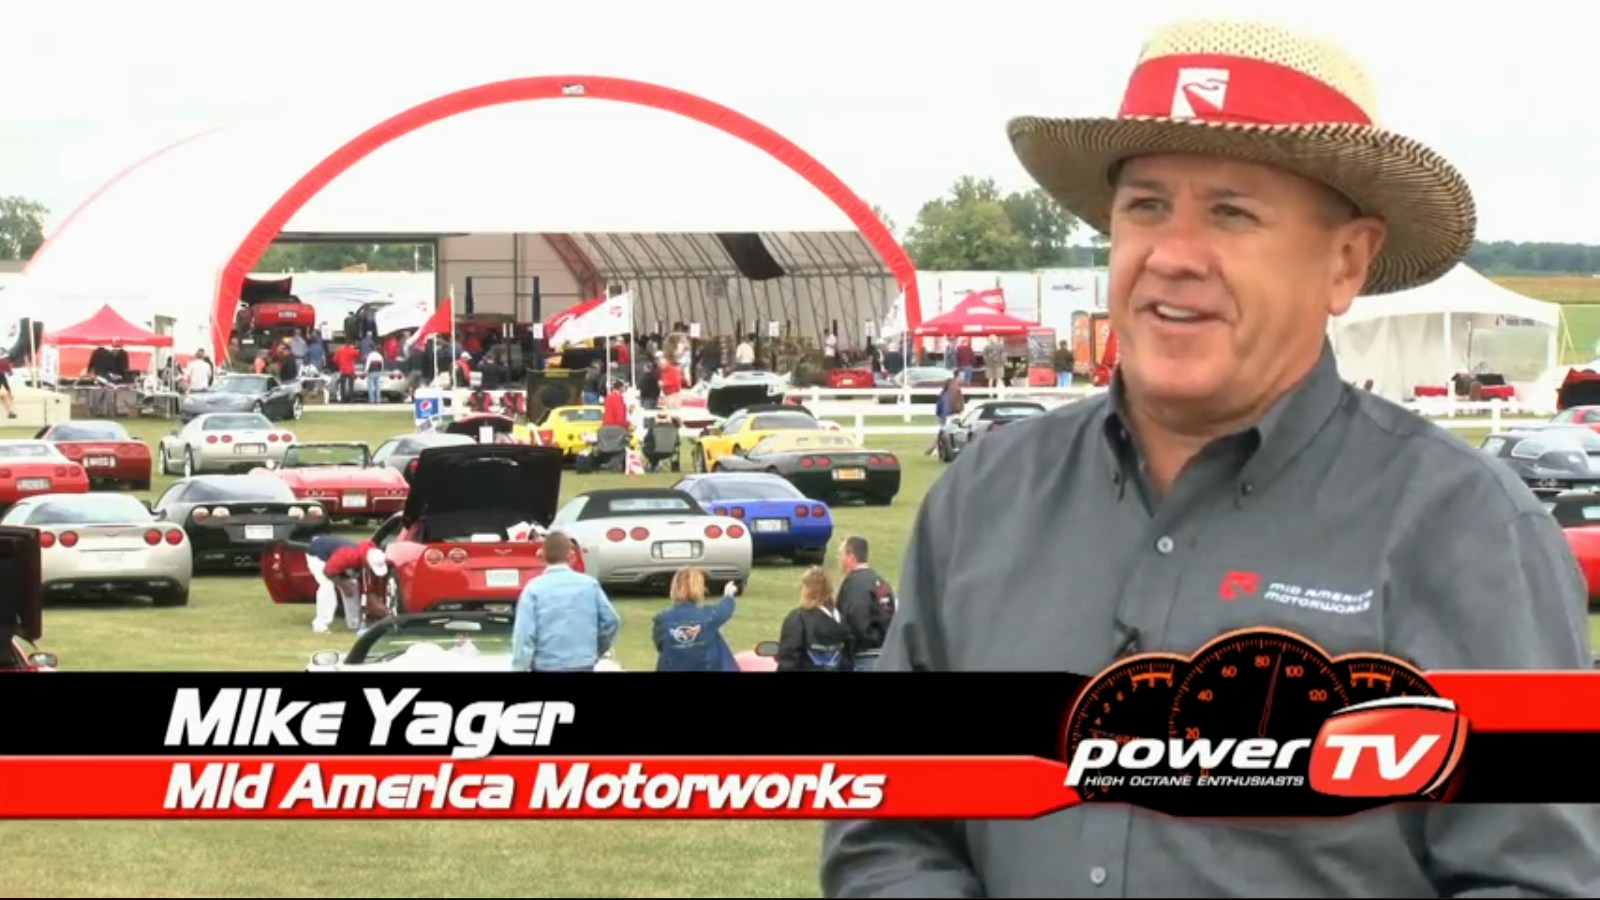 Video: powerTV's Corvette Funfest 2011 Highlights with Mike Yager 